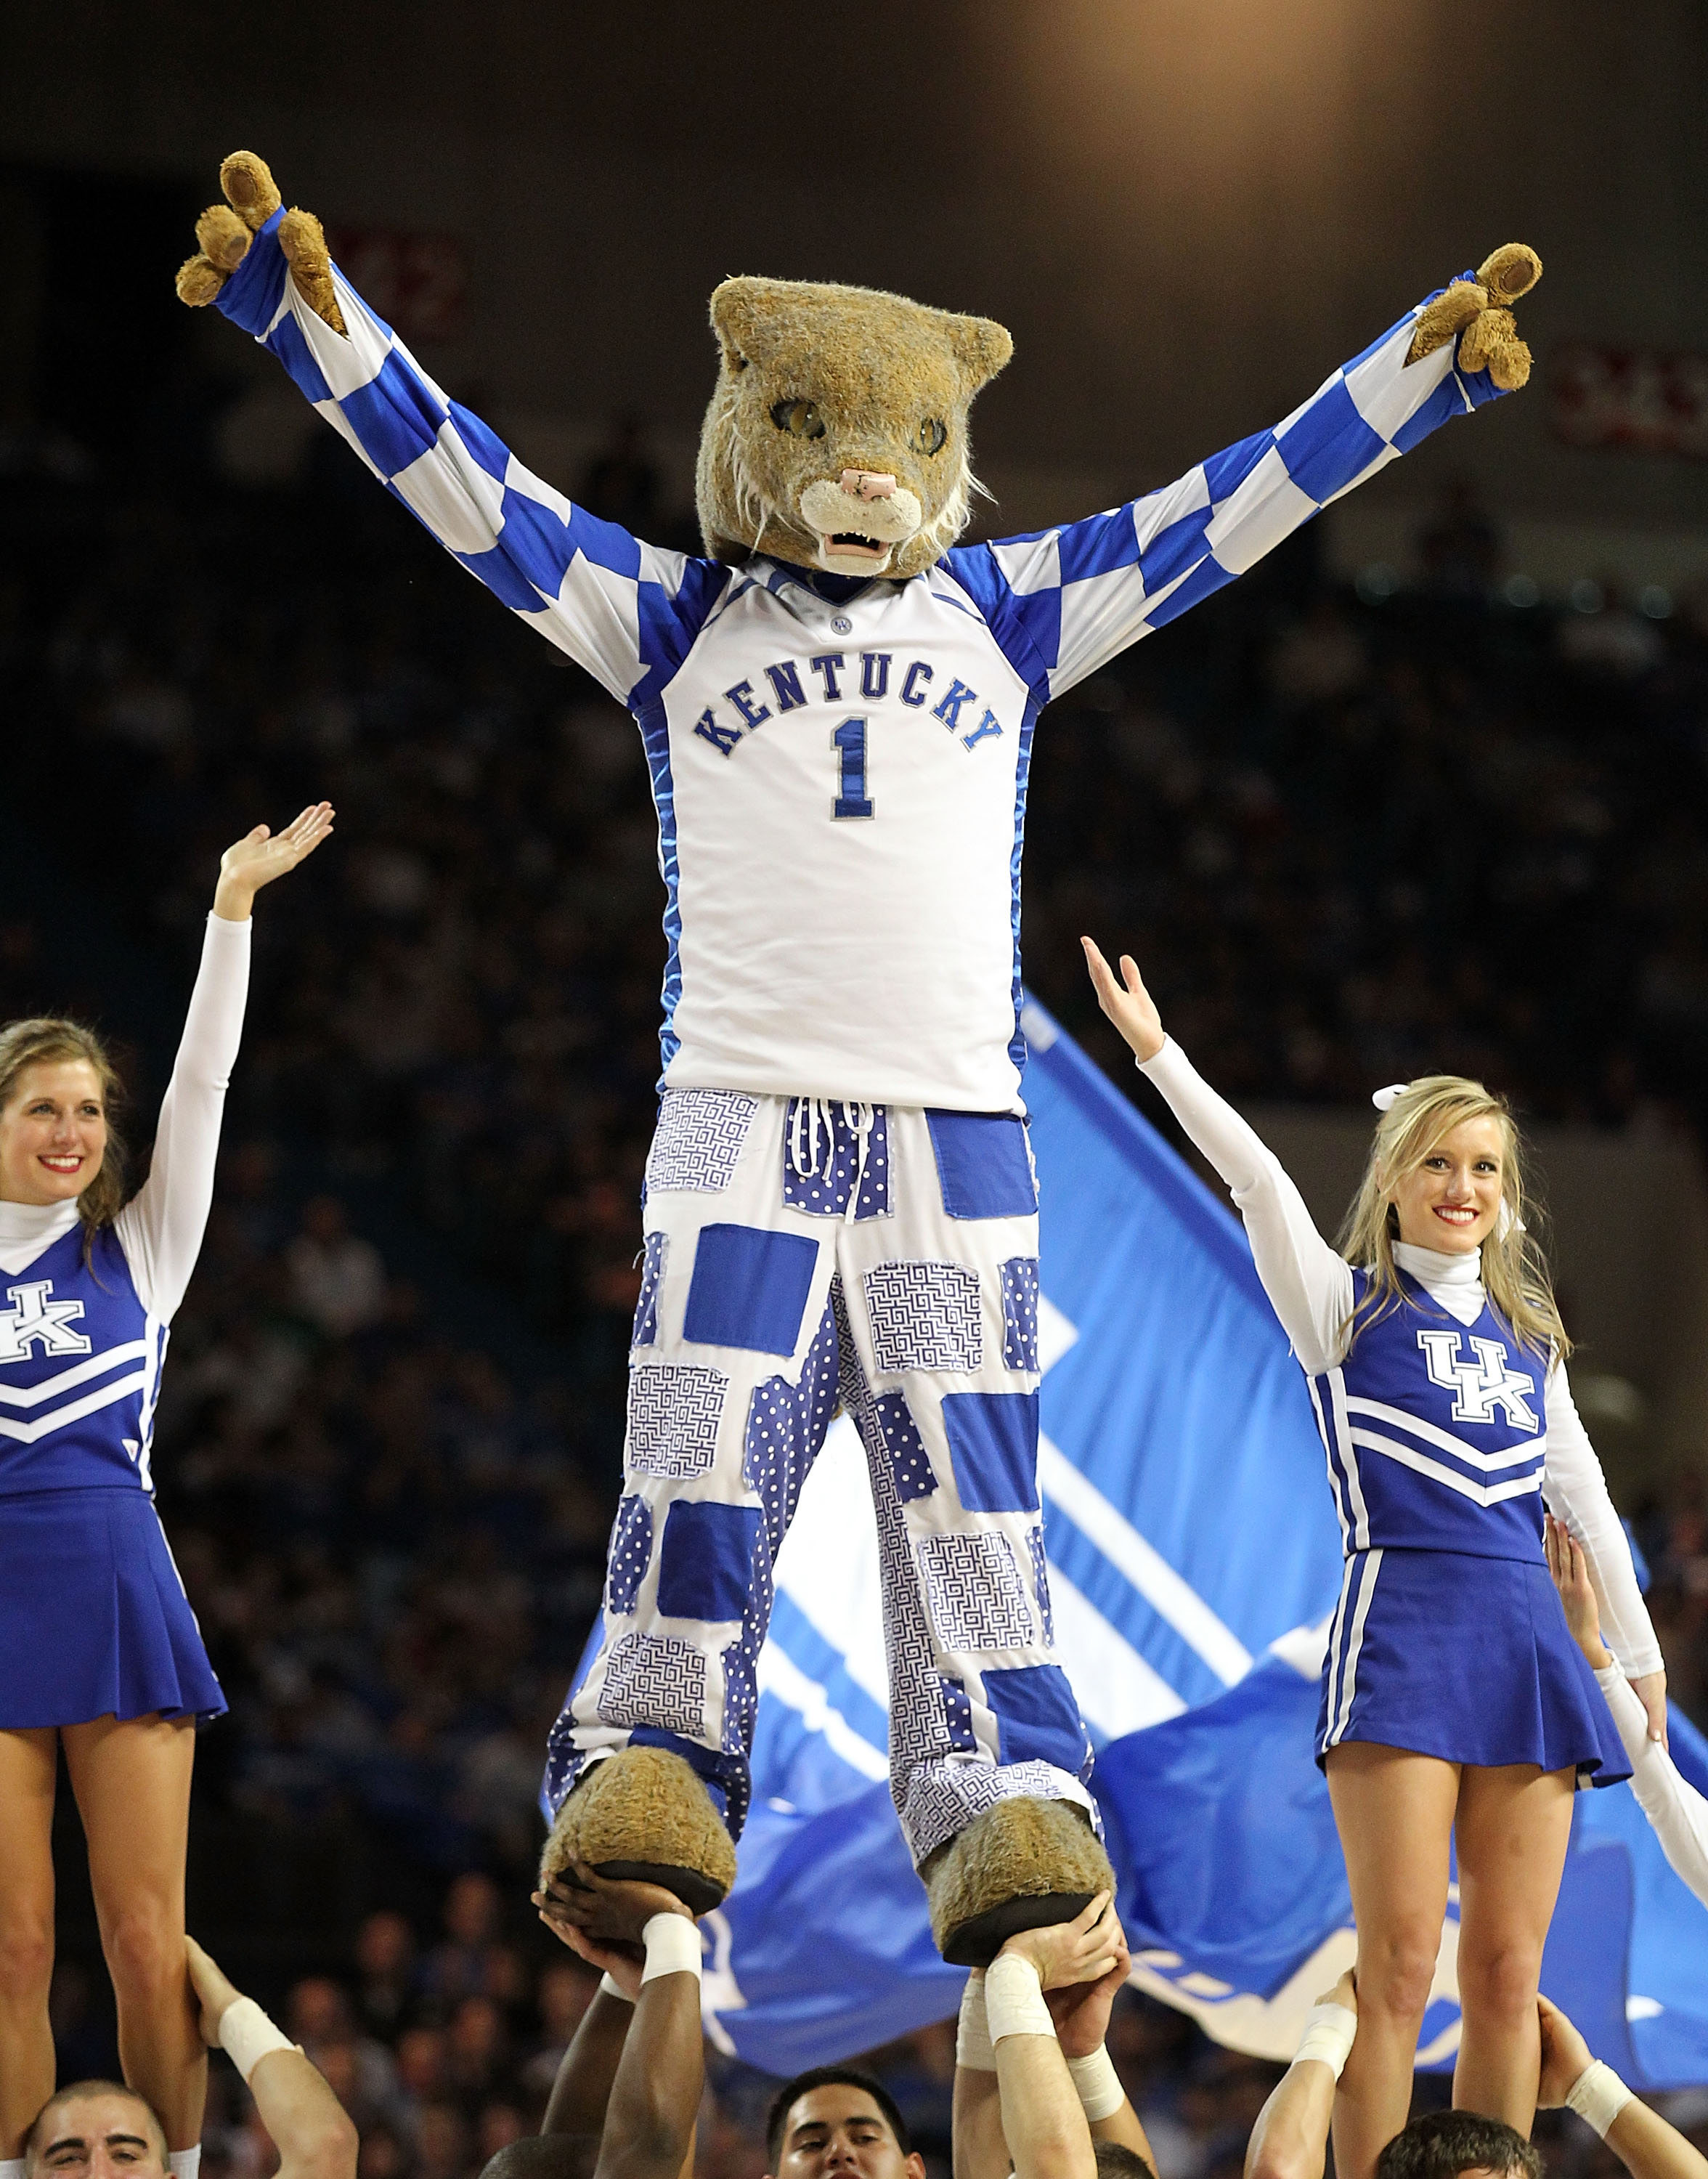 LOUISVILLE, KY - DECEMBER 08:  The Kentucky Wildcats mascot performs during the game against the Notre Dame Fighting Irish in the 2010 DIRECTV SEC/BIG EAST Invitational at Freedom Hall on December 8, 2010 in Louisville, Kentucky.  (Photo by Andy Lyons/Get